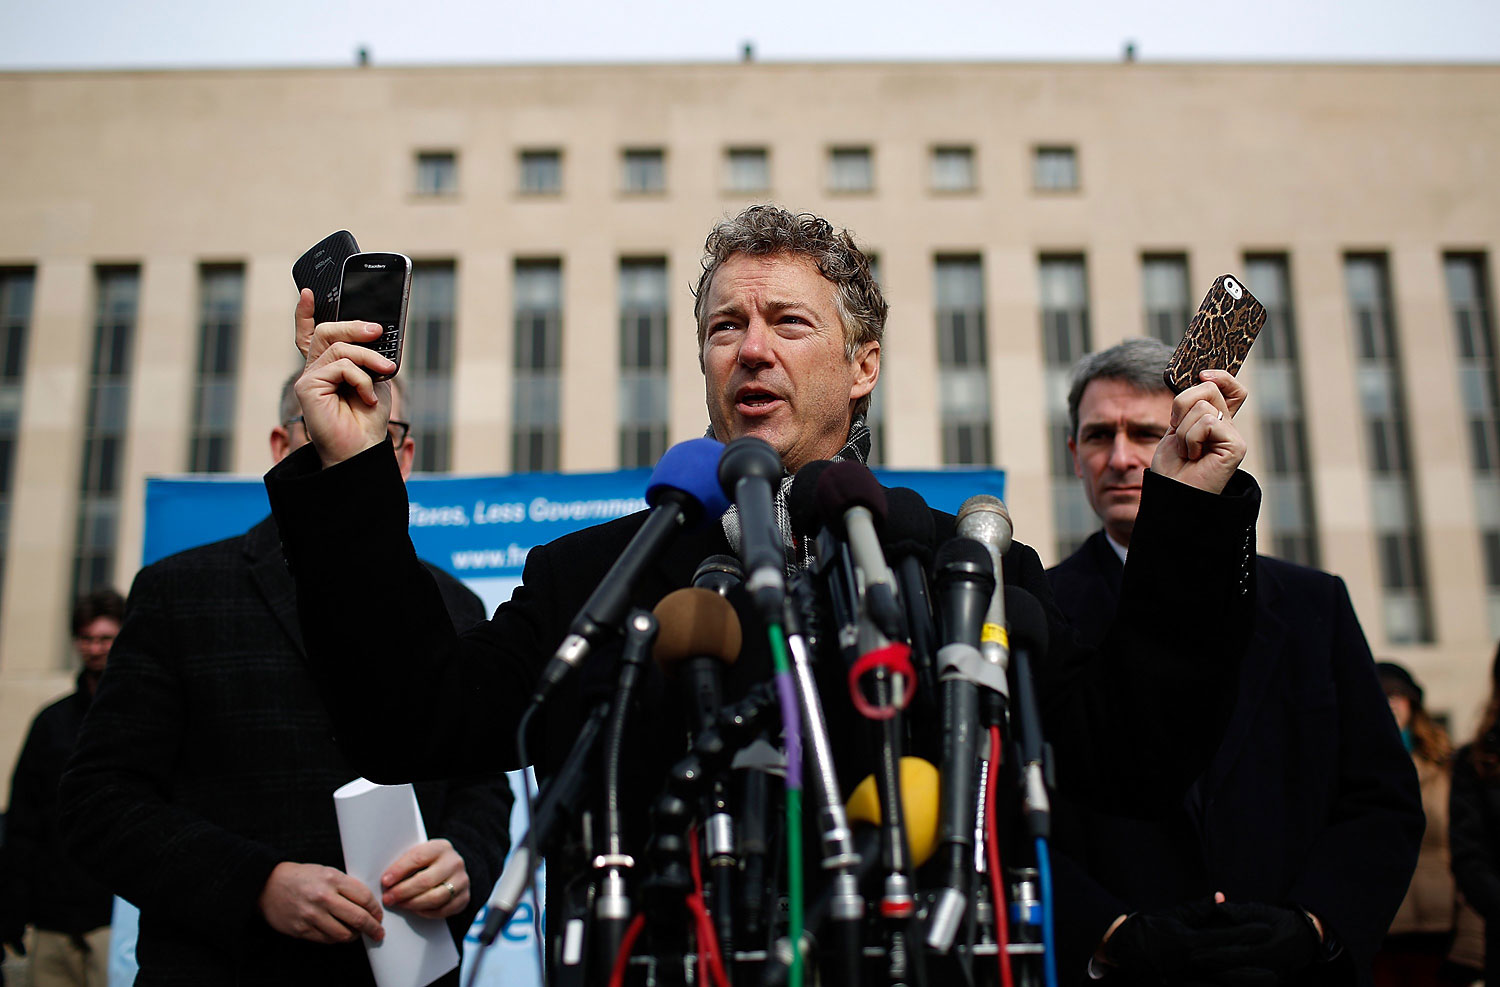 Sen. Rand Paul holds up a group of cell phones in front of U.S. District Court to announce the filing of a class action lawsuit against the administration of U.S. President Barack Obama, Feb. 12. 2014.